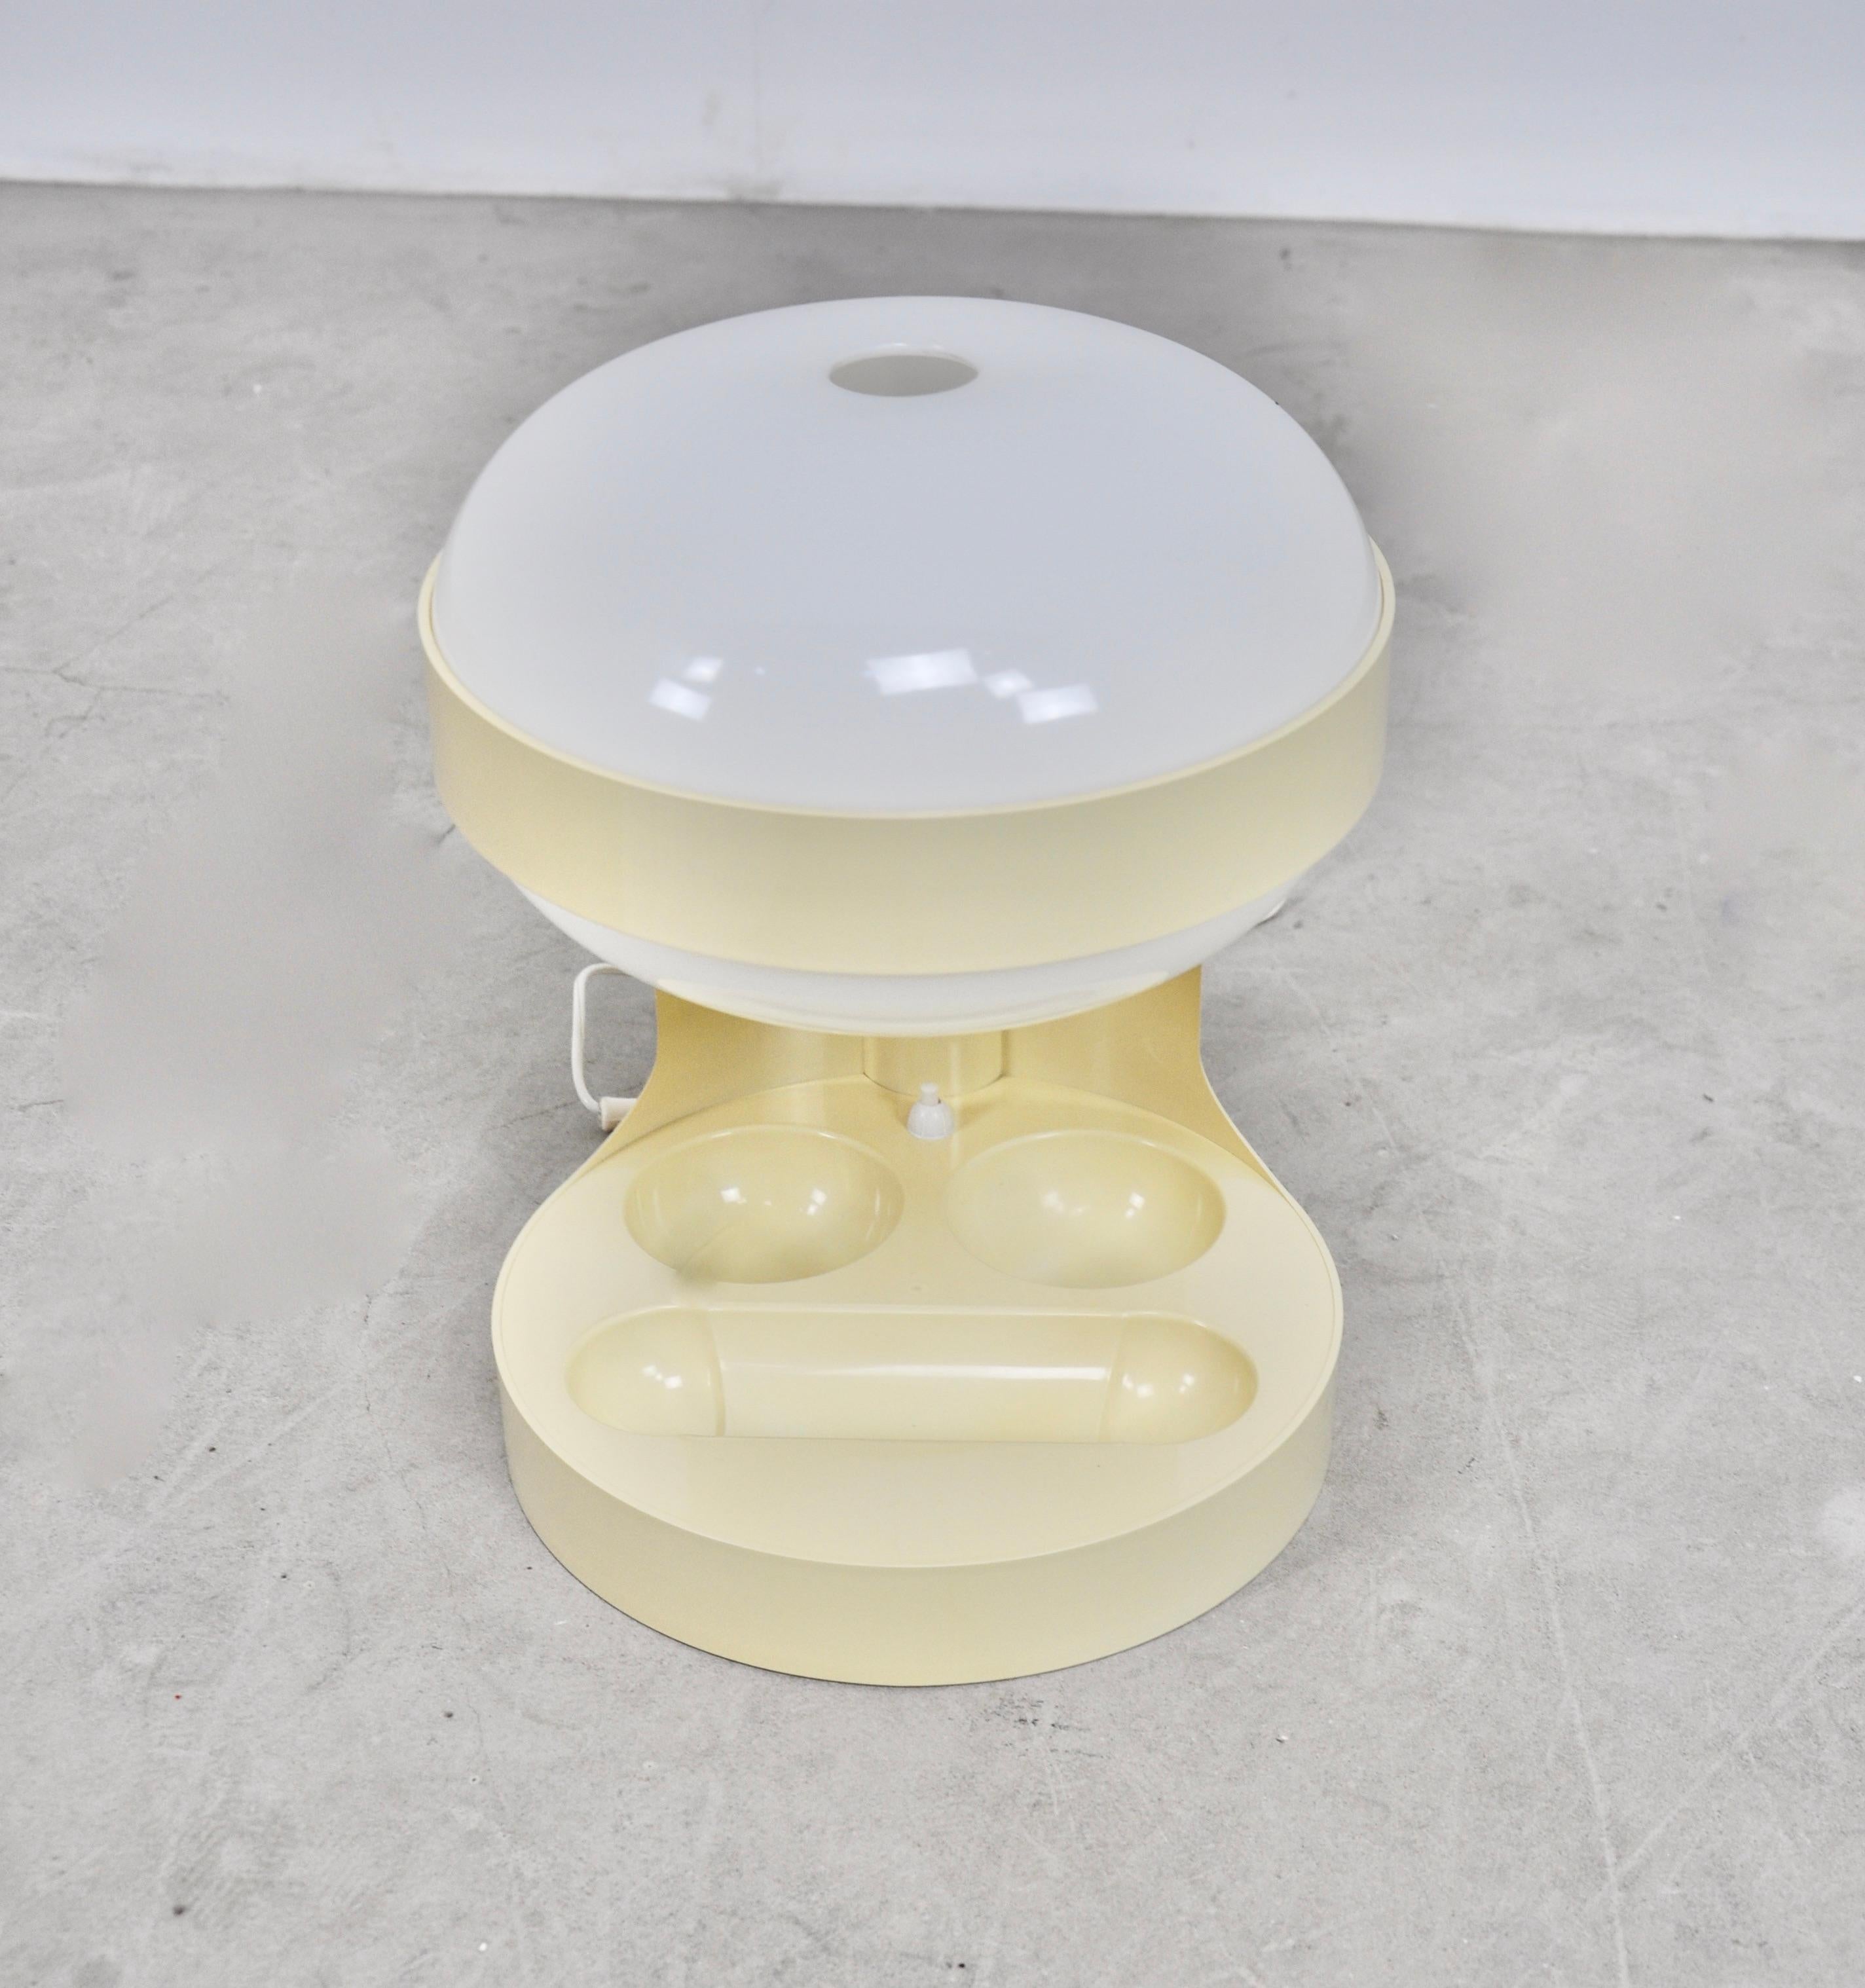 Plastic lamp of white color. Wear due to time and the age of the object (see photo).